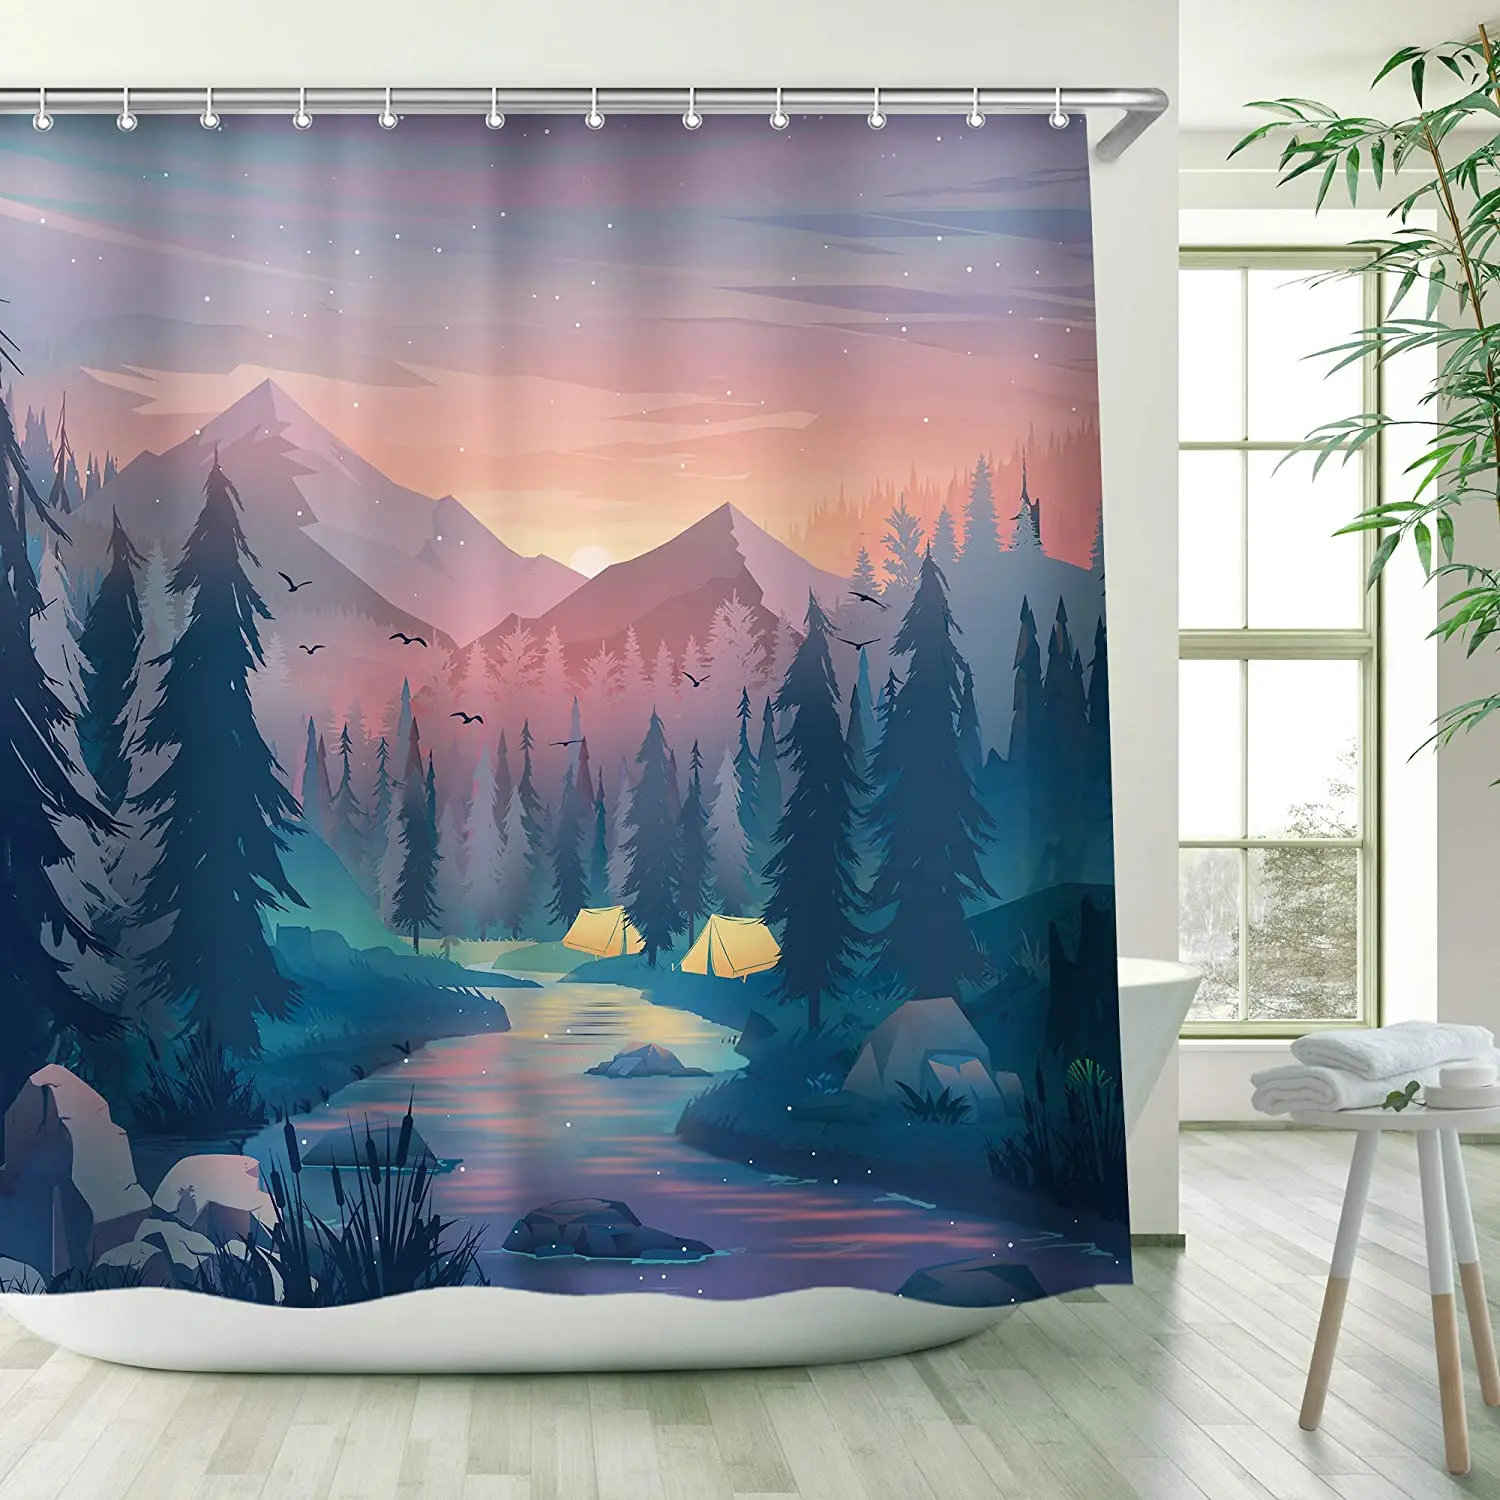 

Trippy Mountain Shower Curtains Forest Shower Curtain Waterproof Shower Curtain Set with 12 Hooks Bathroom Decor 72X72 Inches